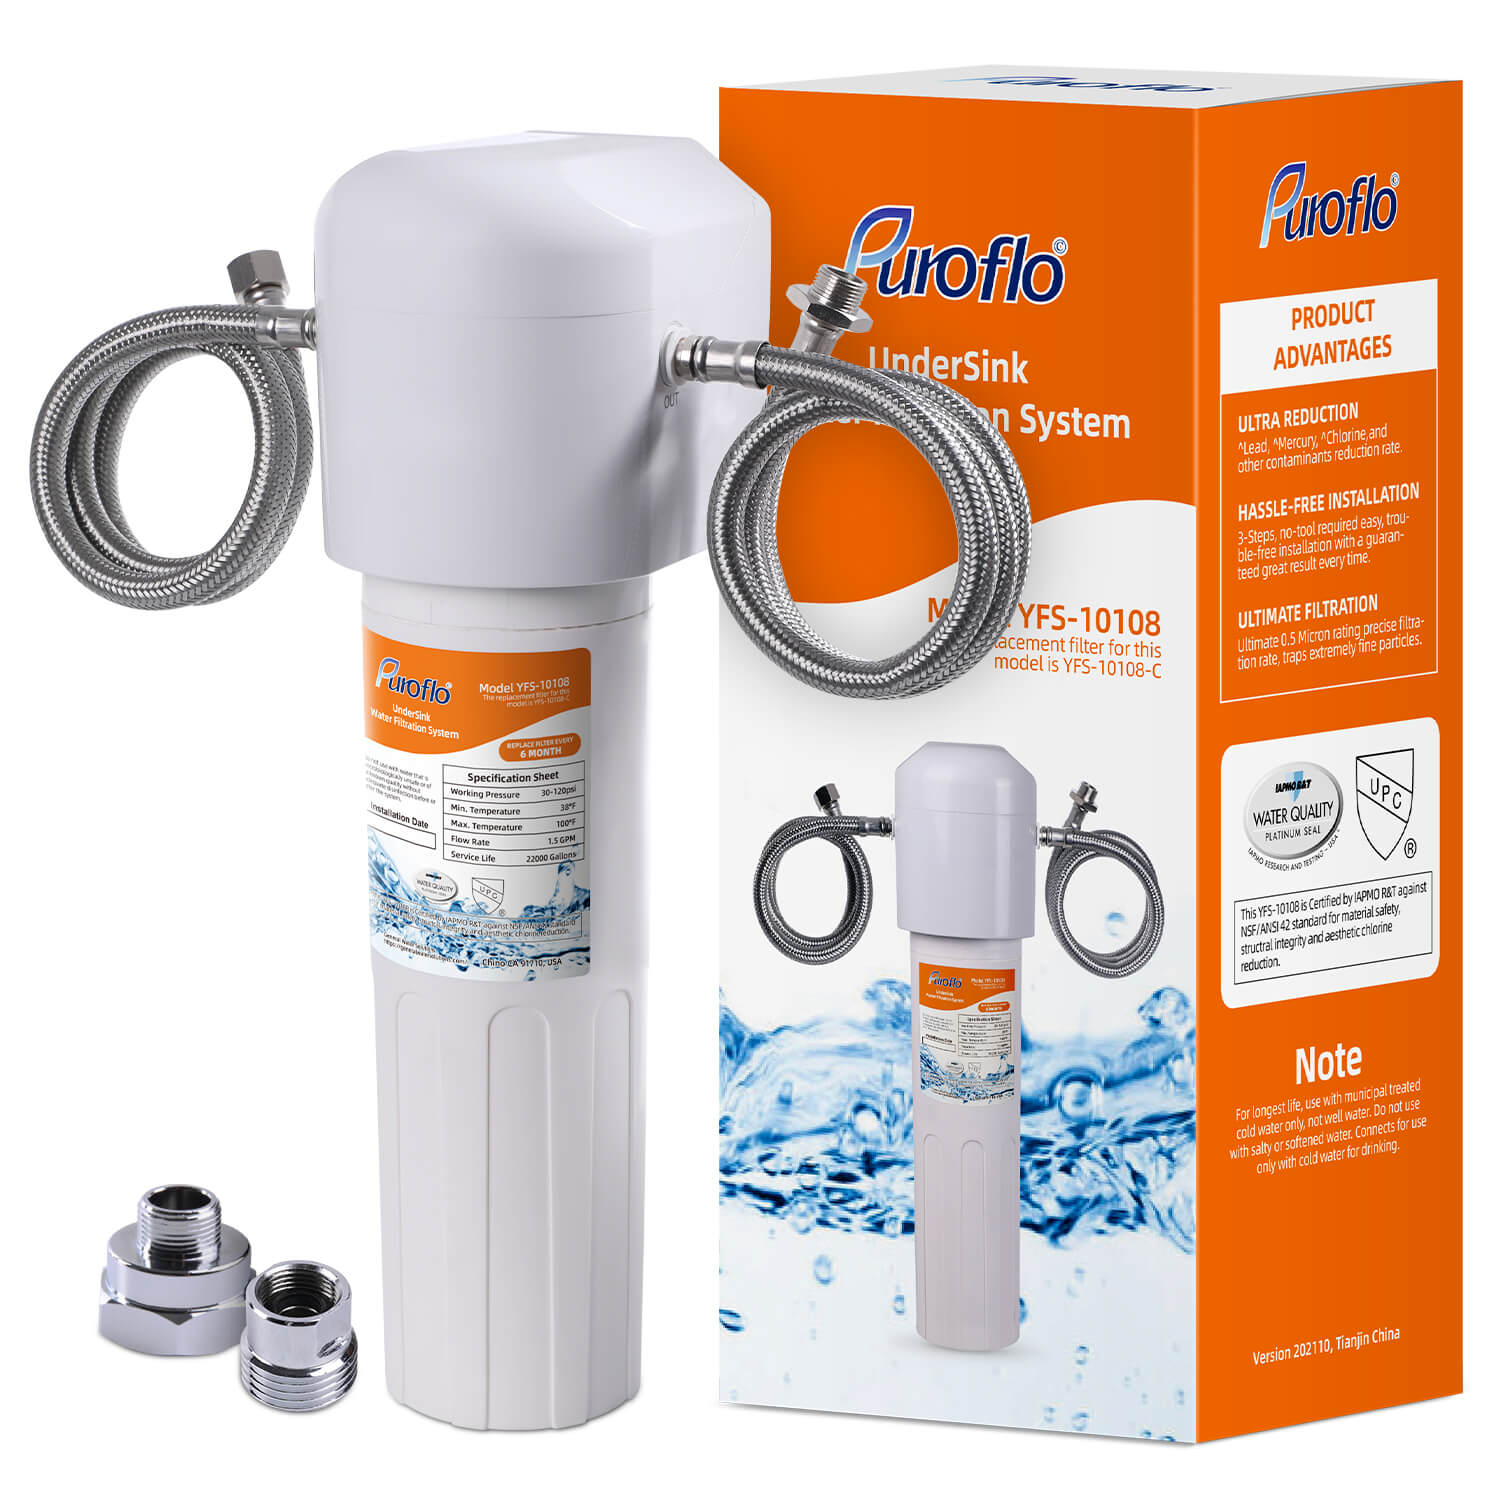 Puroflo Under Sink Water Filter System, Ultra High 22000G Capacity, Directly Connect Under Counter Drinking Water System, NSF/ANSI 42 Certified, Removes Chlorine Odor Heavy Metals, USA Tech Support